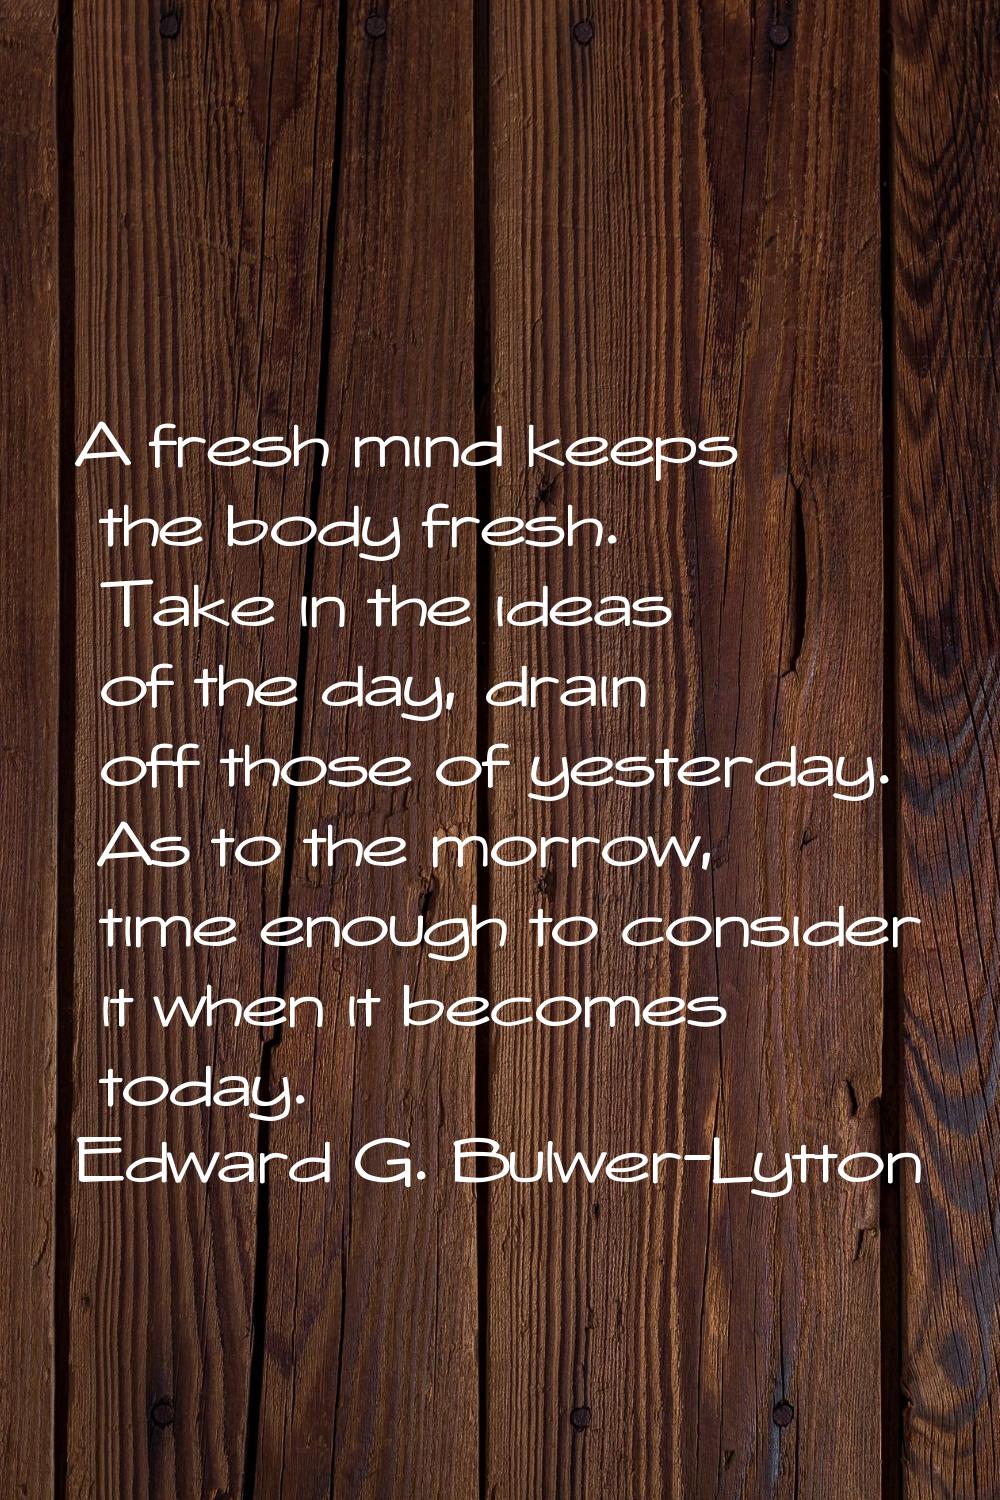 A fresh mind keeps the body fresh. Take in the ideas of the day, drain off those of yesterday. As t